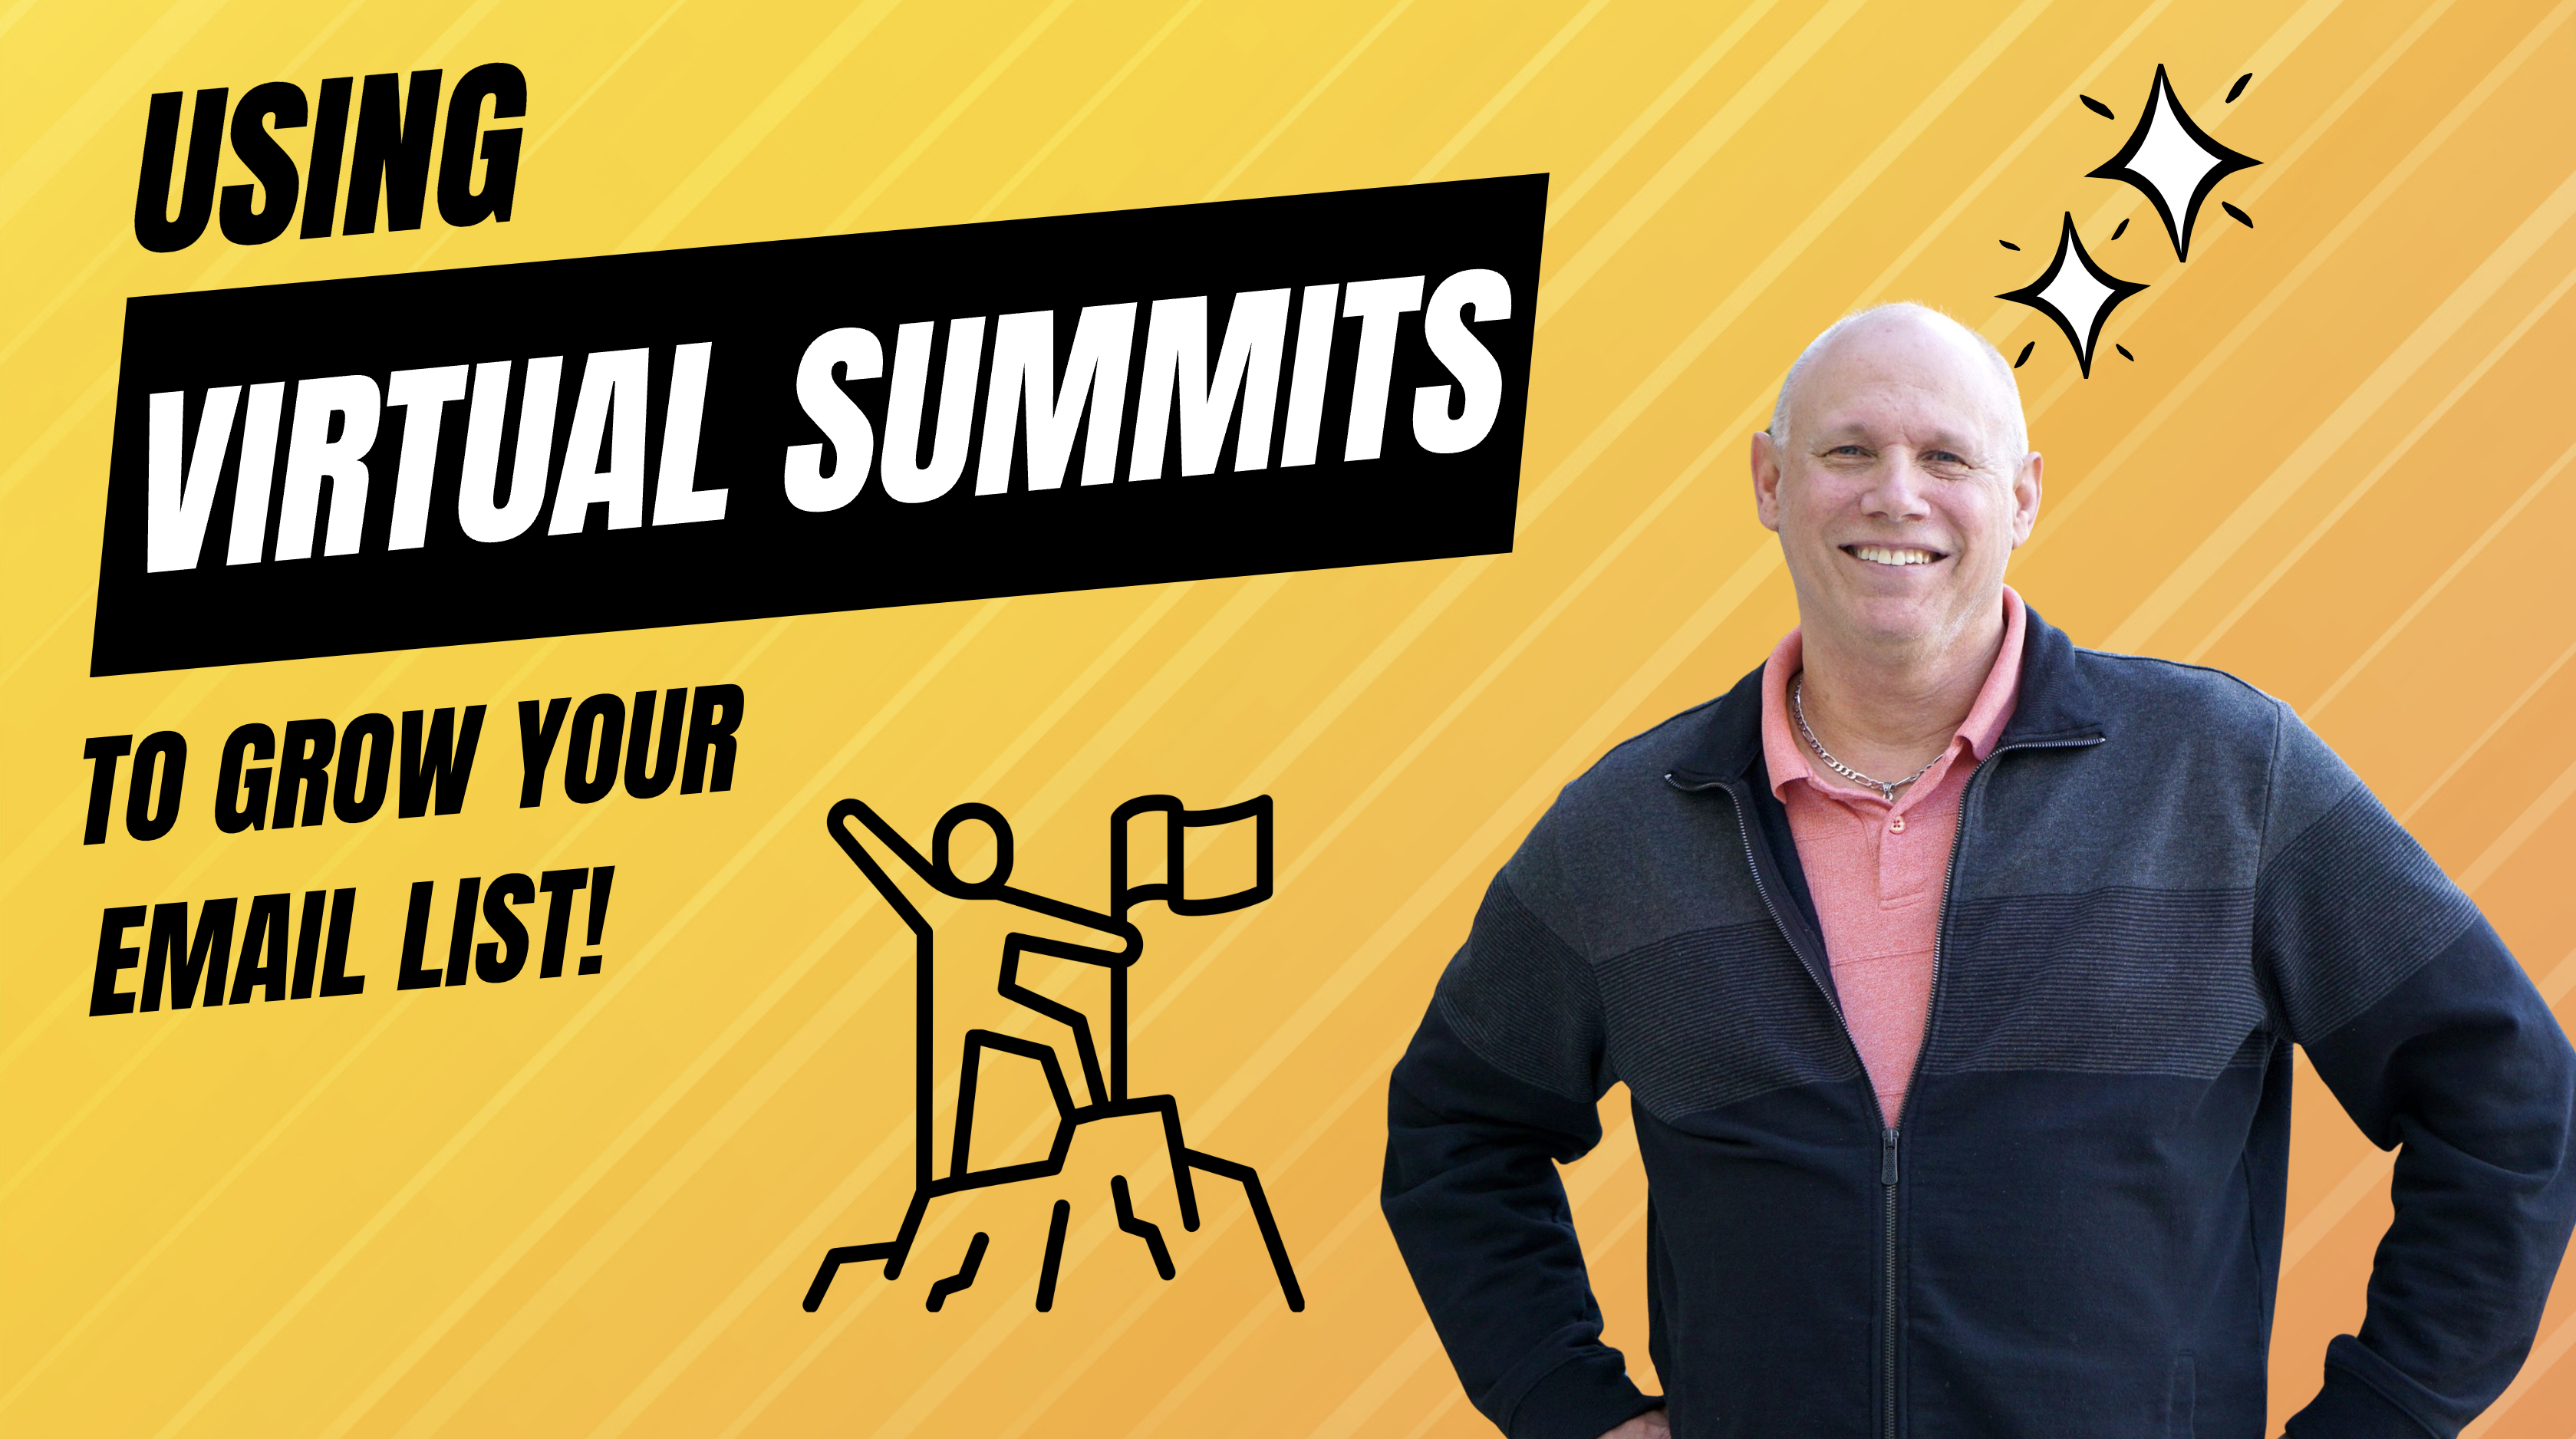 Can You Use Virtual Summits for Effective List Building?